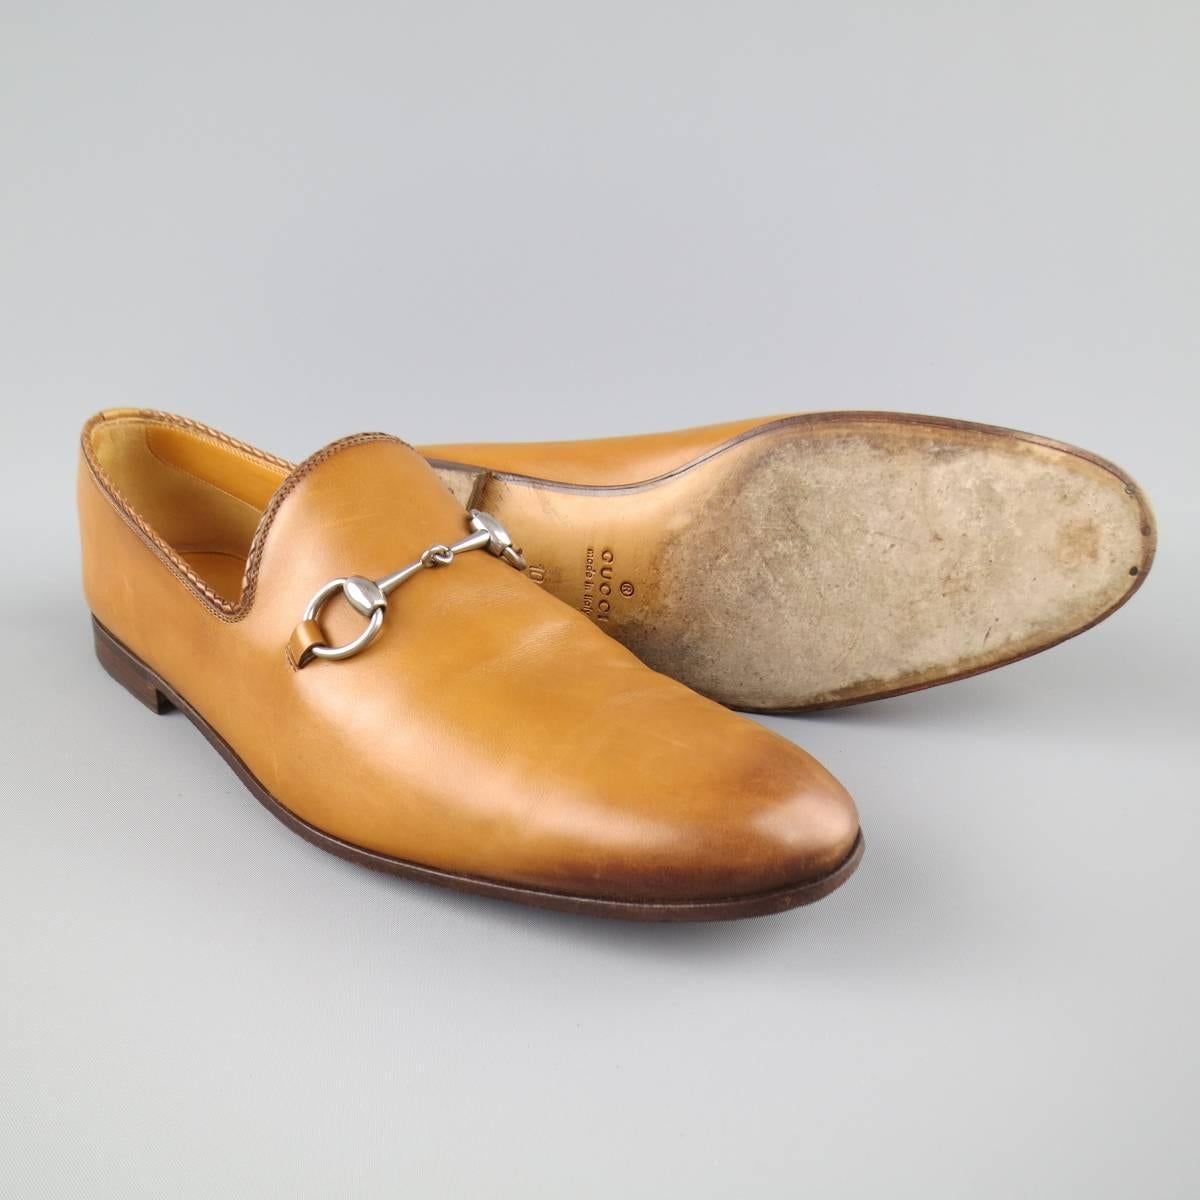 GUCCI loafers in a smooth tan leather featuring a brown ombre tip dye effect, braided piping, and silver tone horsebit detail. Wear throughout. With box  and shoe trees. Made in Italy.
 
Good Pre-Owned Condition.
Marked: UK 10